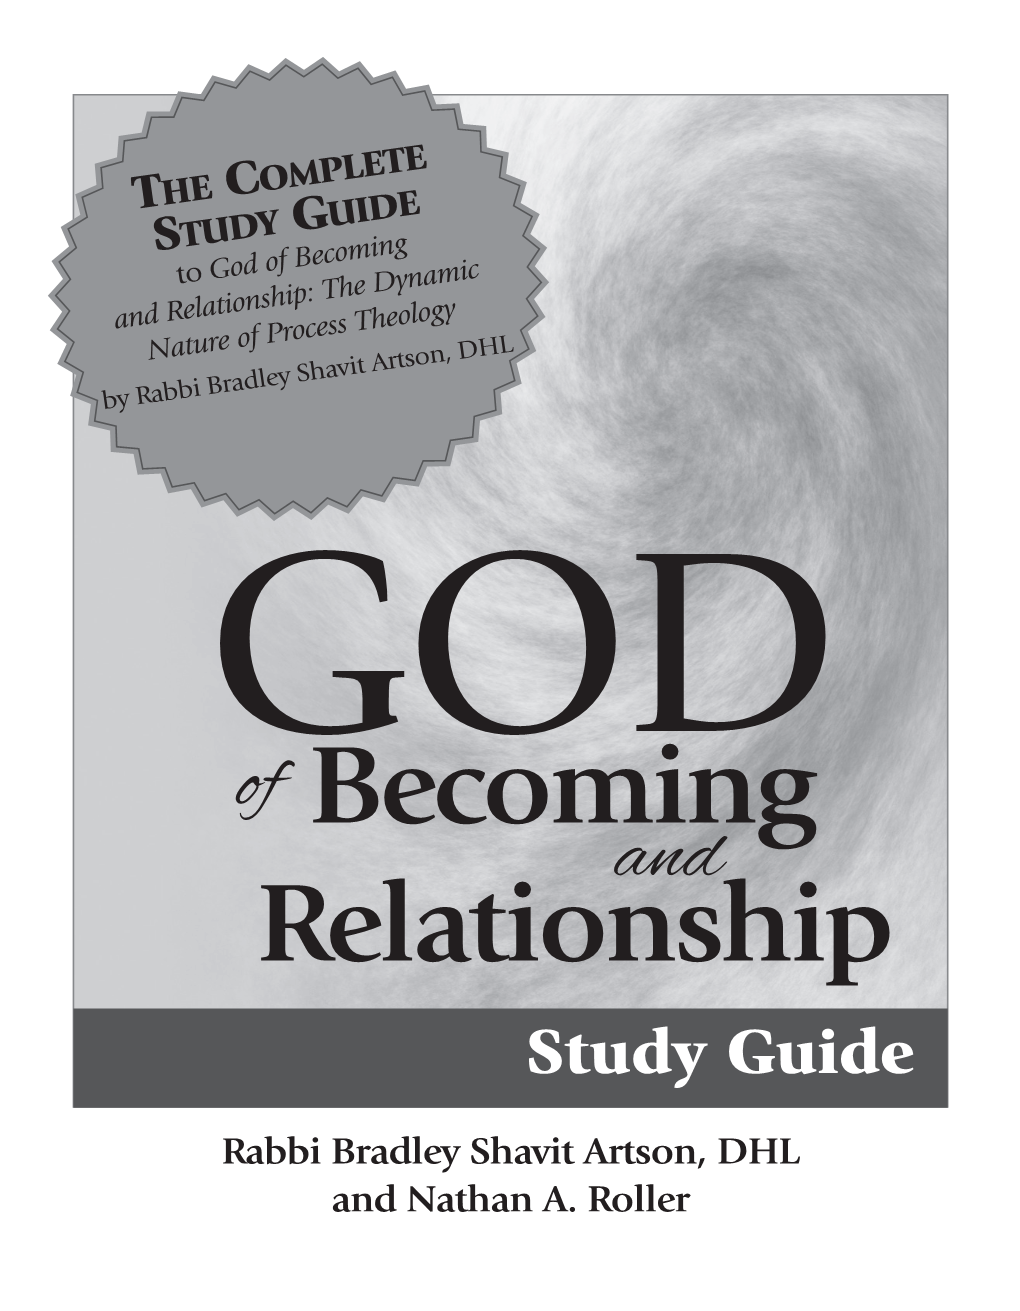 To Download a Free Copy of the God of Becoming And